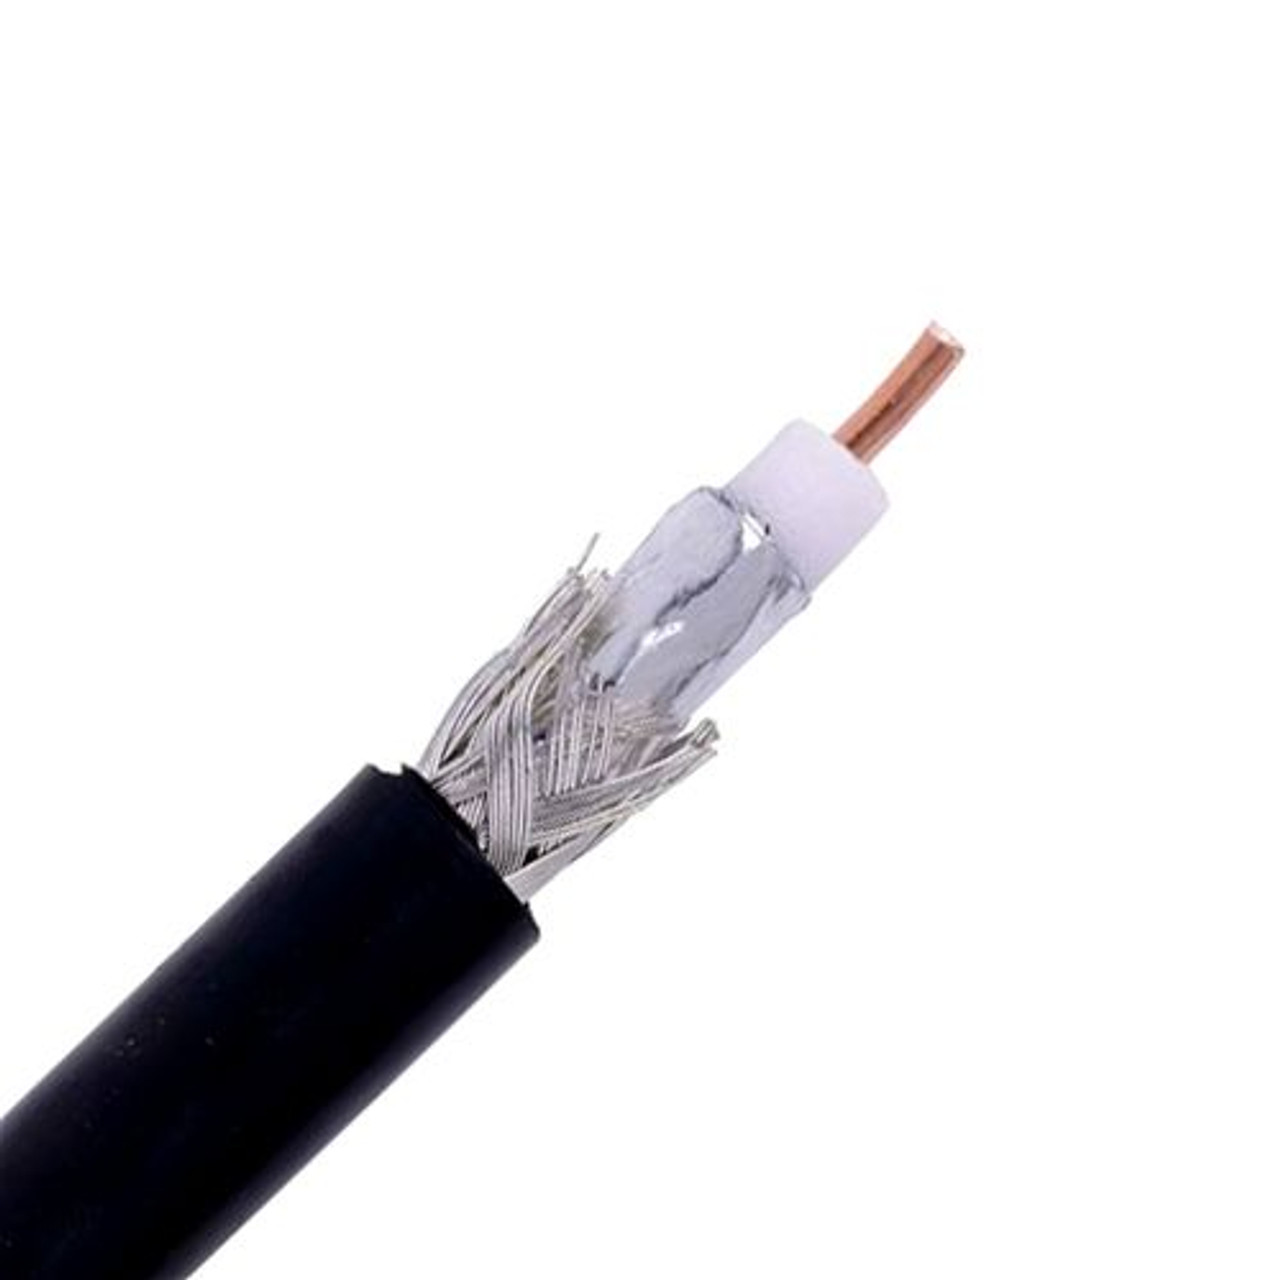 Steren 200-930BK 100' Ft RG6 Coaxial Cable RG6 75 Ohm 18 AWG CCS Center MATV RF Signal Black 2 GHz Dual Shielded 100' FT Bulk Roll RG-6 Coaxial Cable Copper Clad Steel